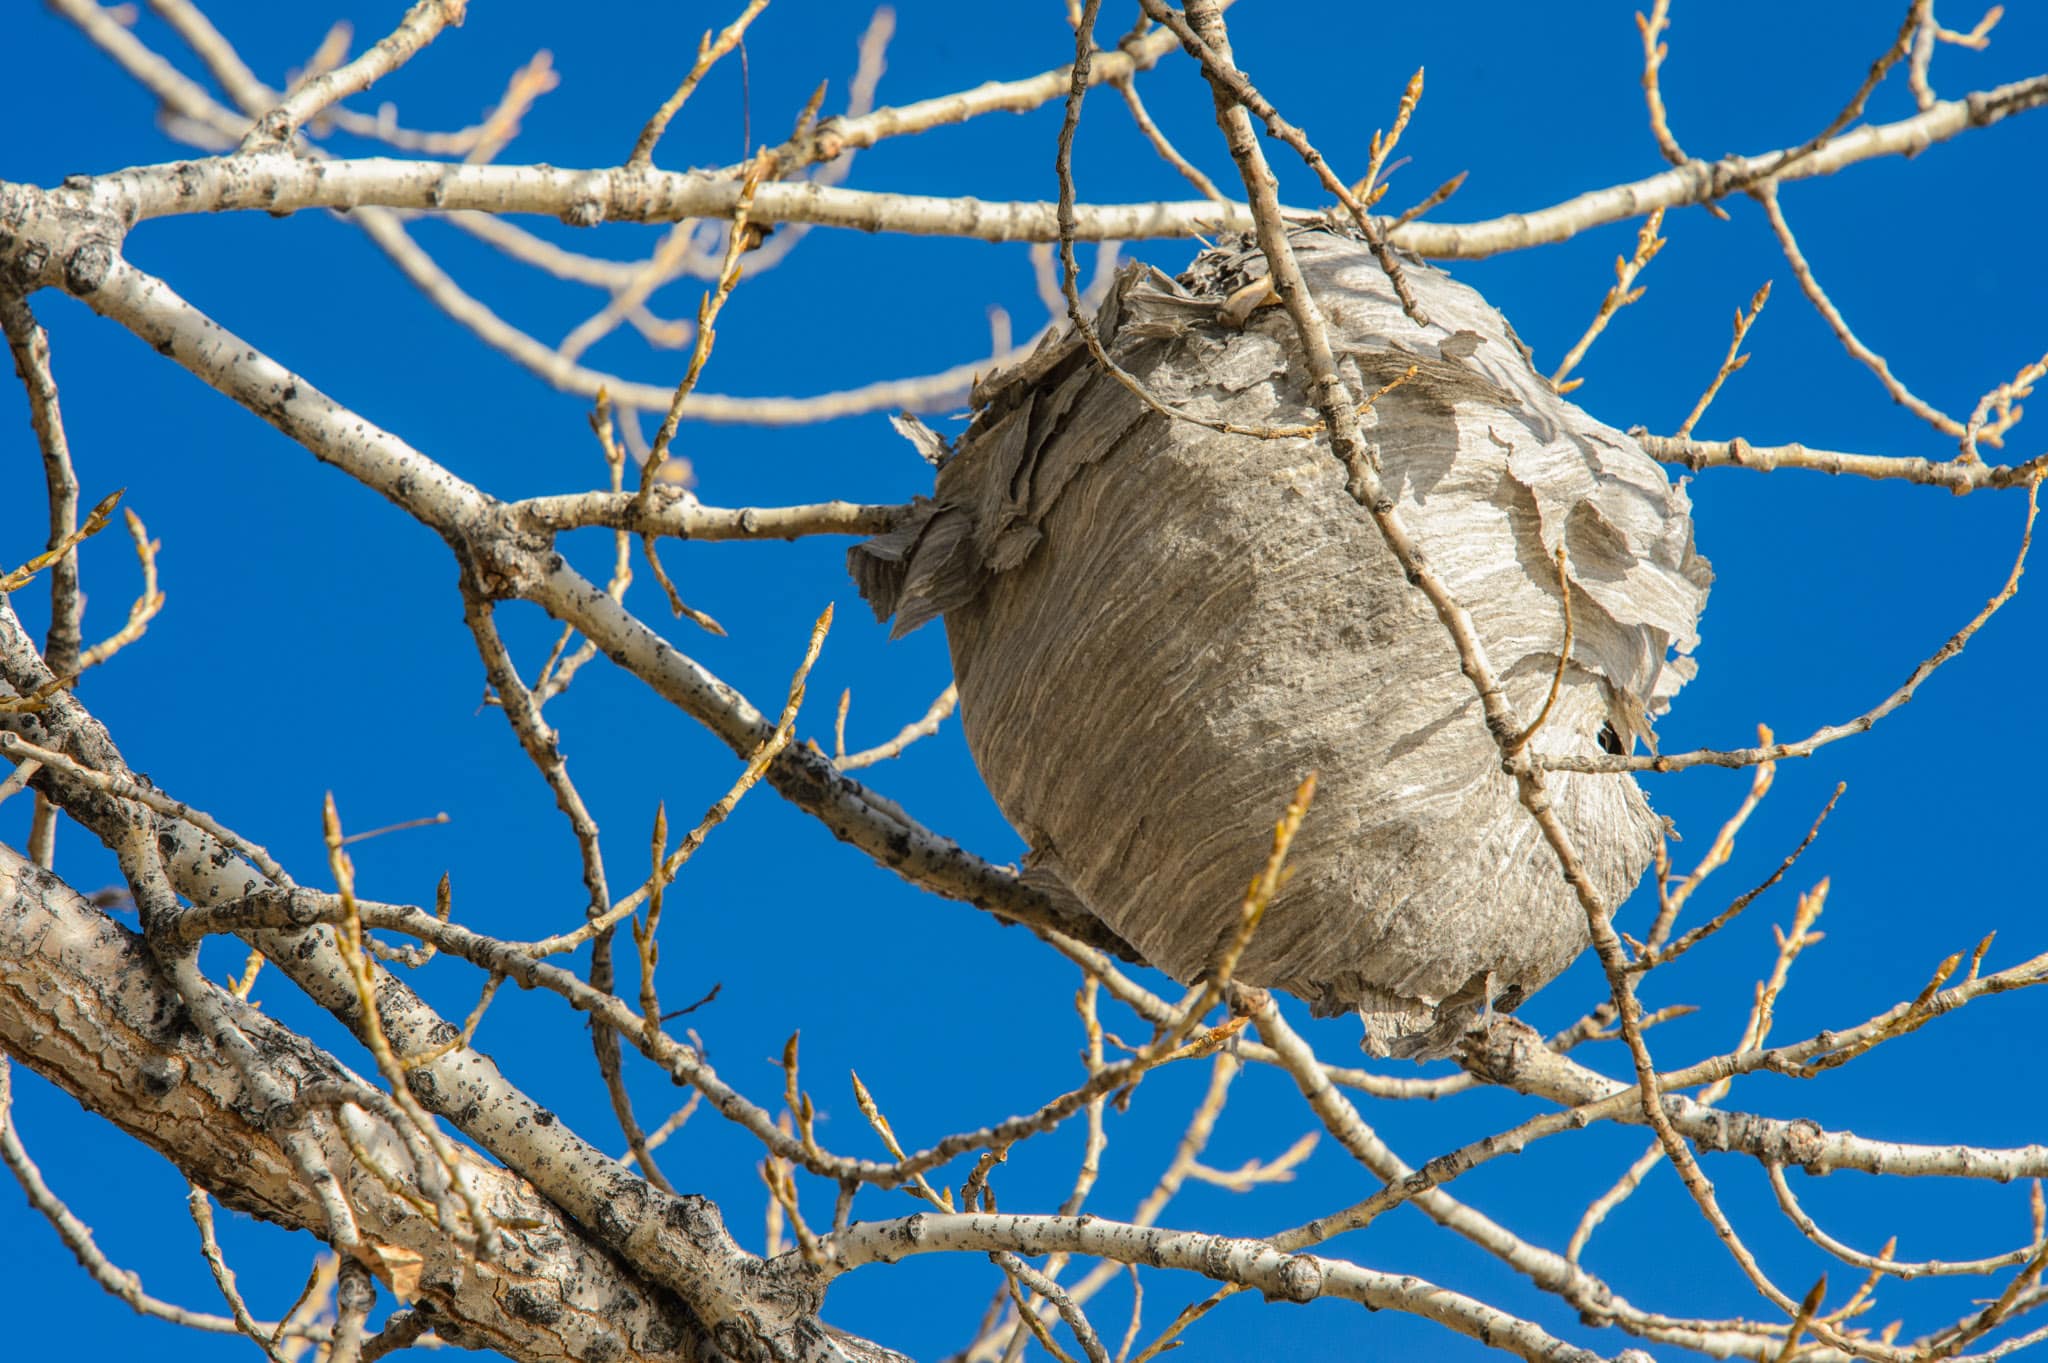 This hornet's nest is in a Cottonwood tree along a trail at Twin Lake in Boulder, Colorado.